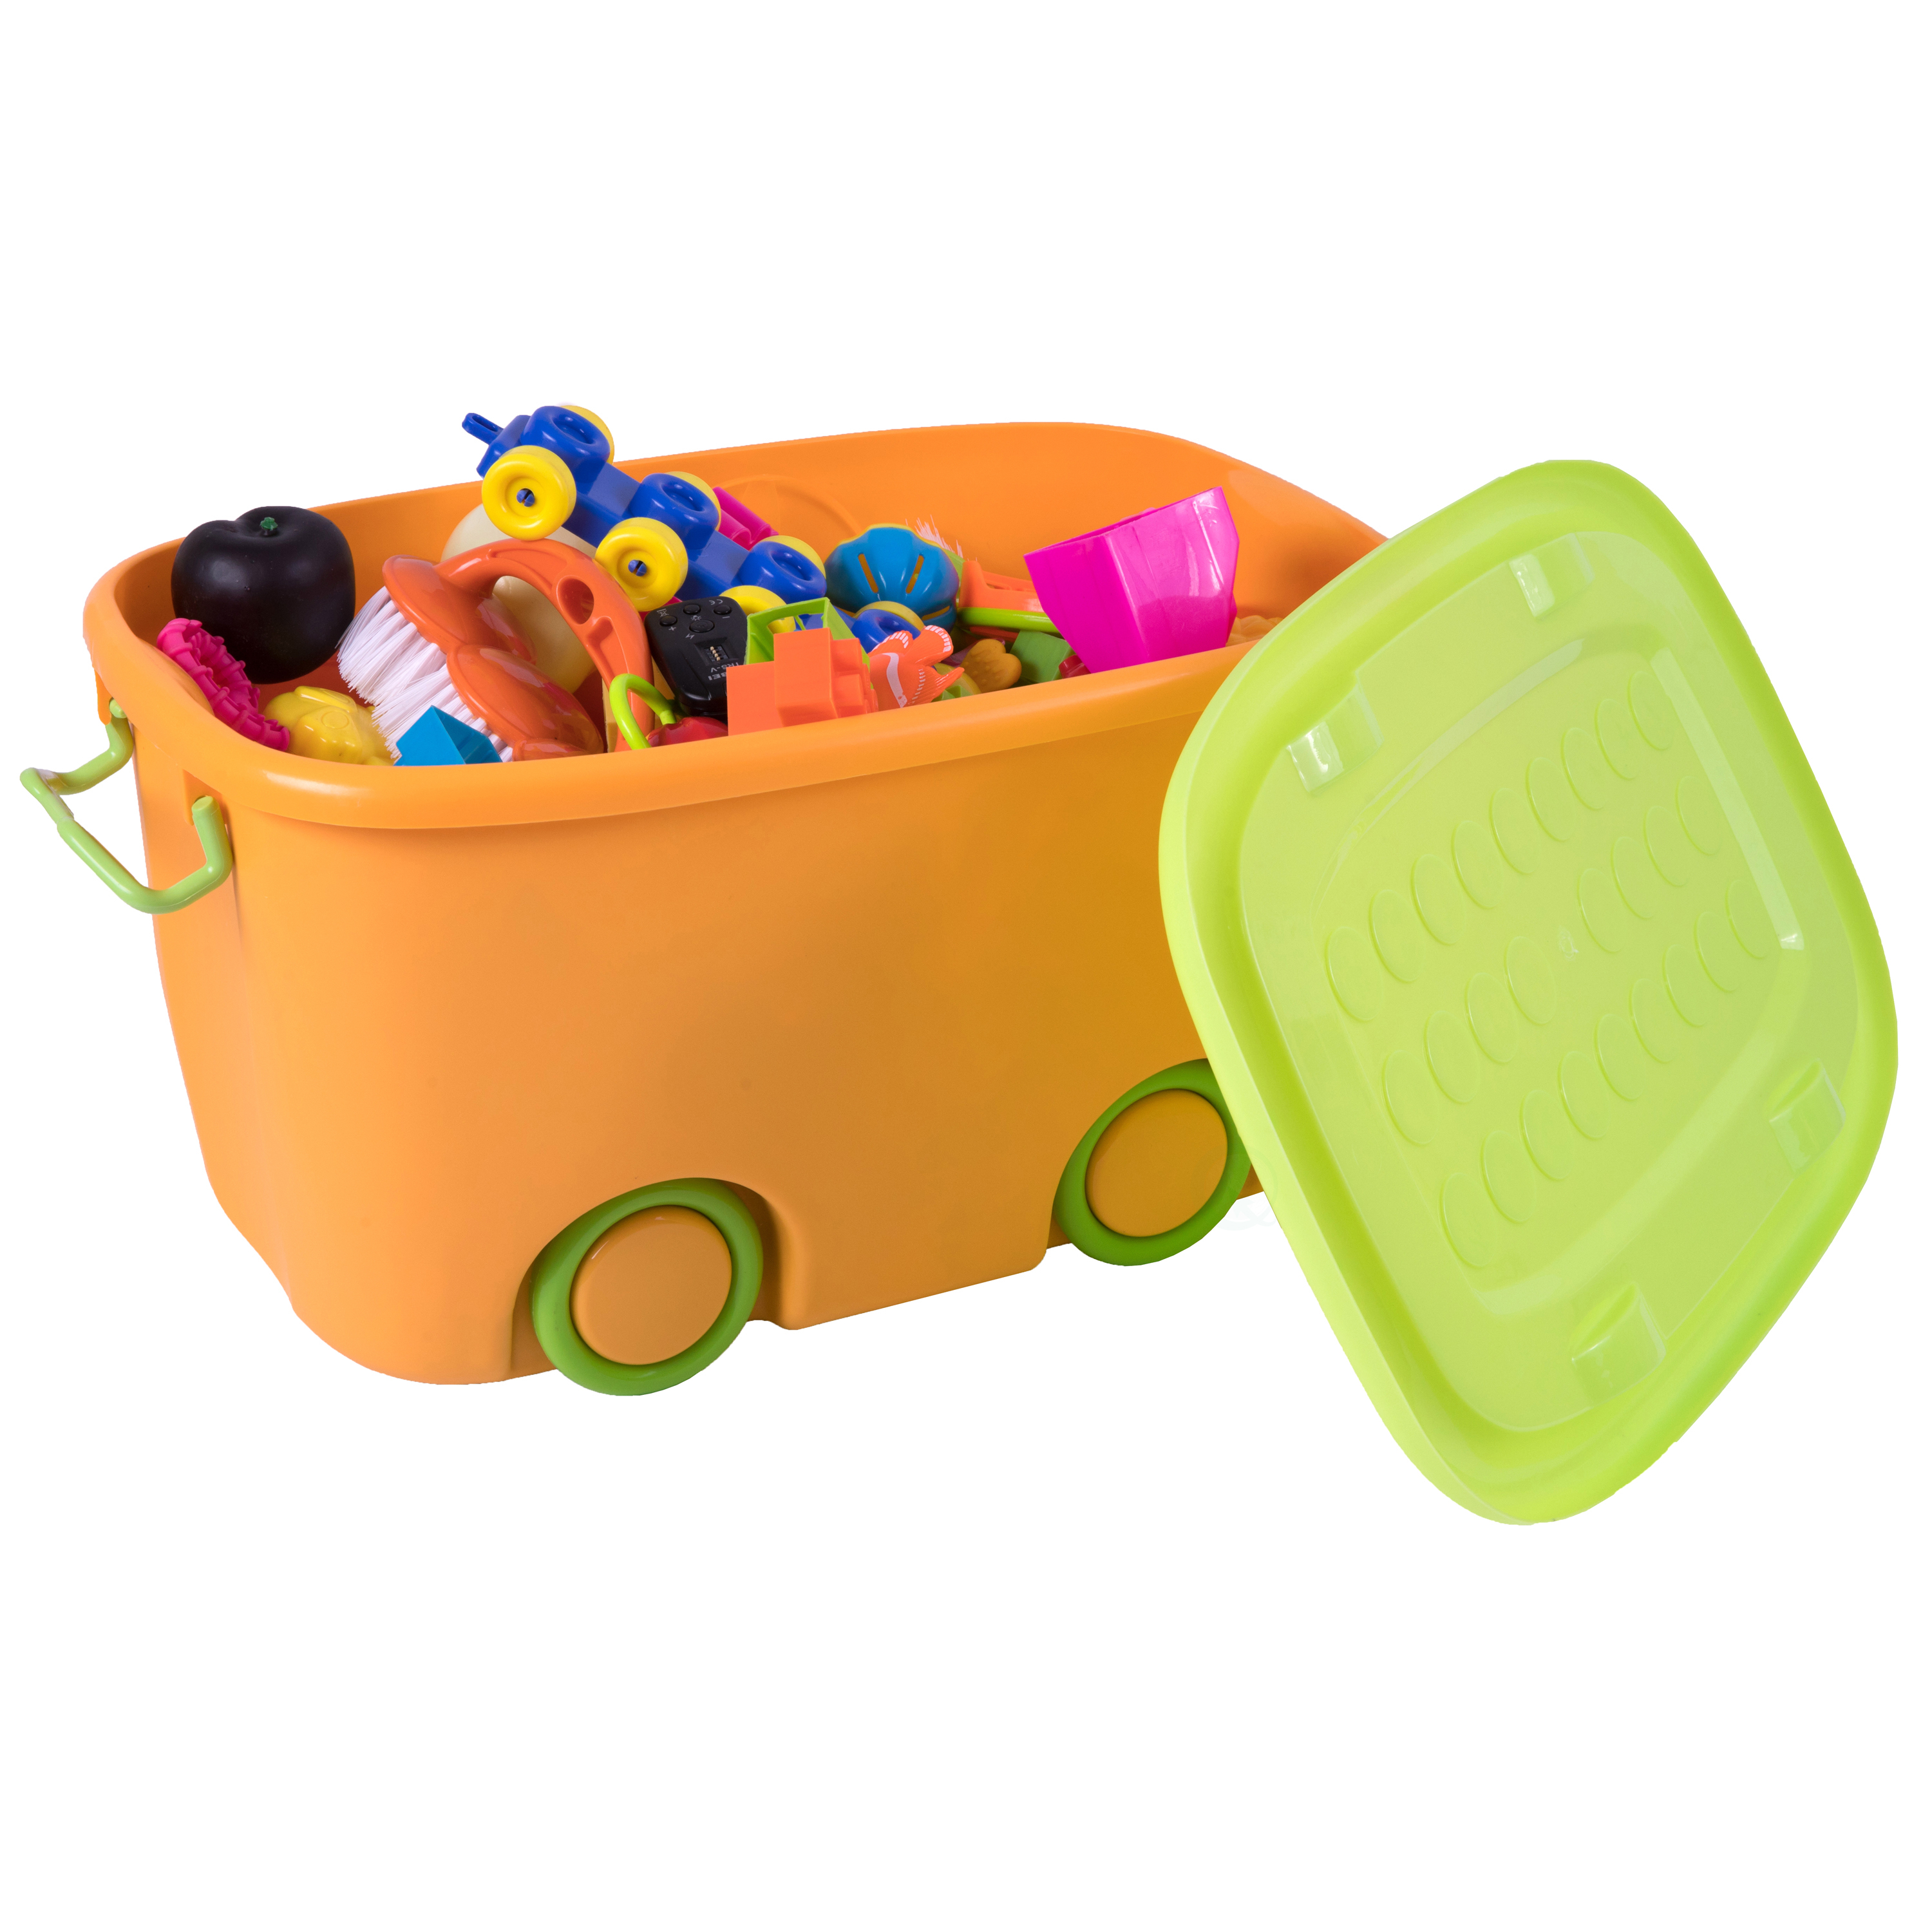 Stackable Toy Storage Box With Wheels - Small Yellow